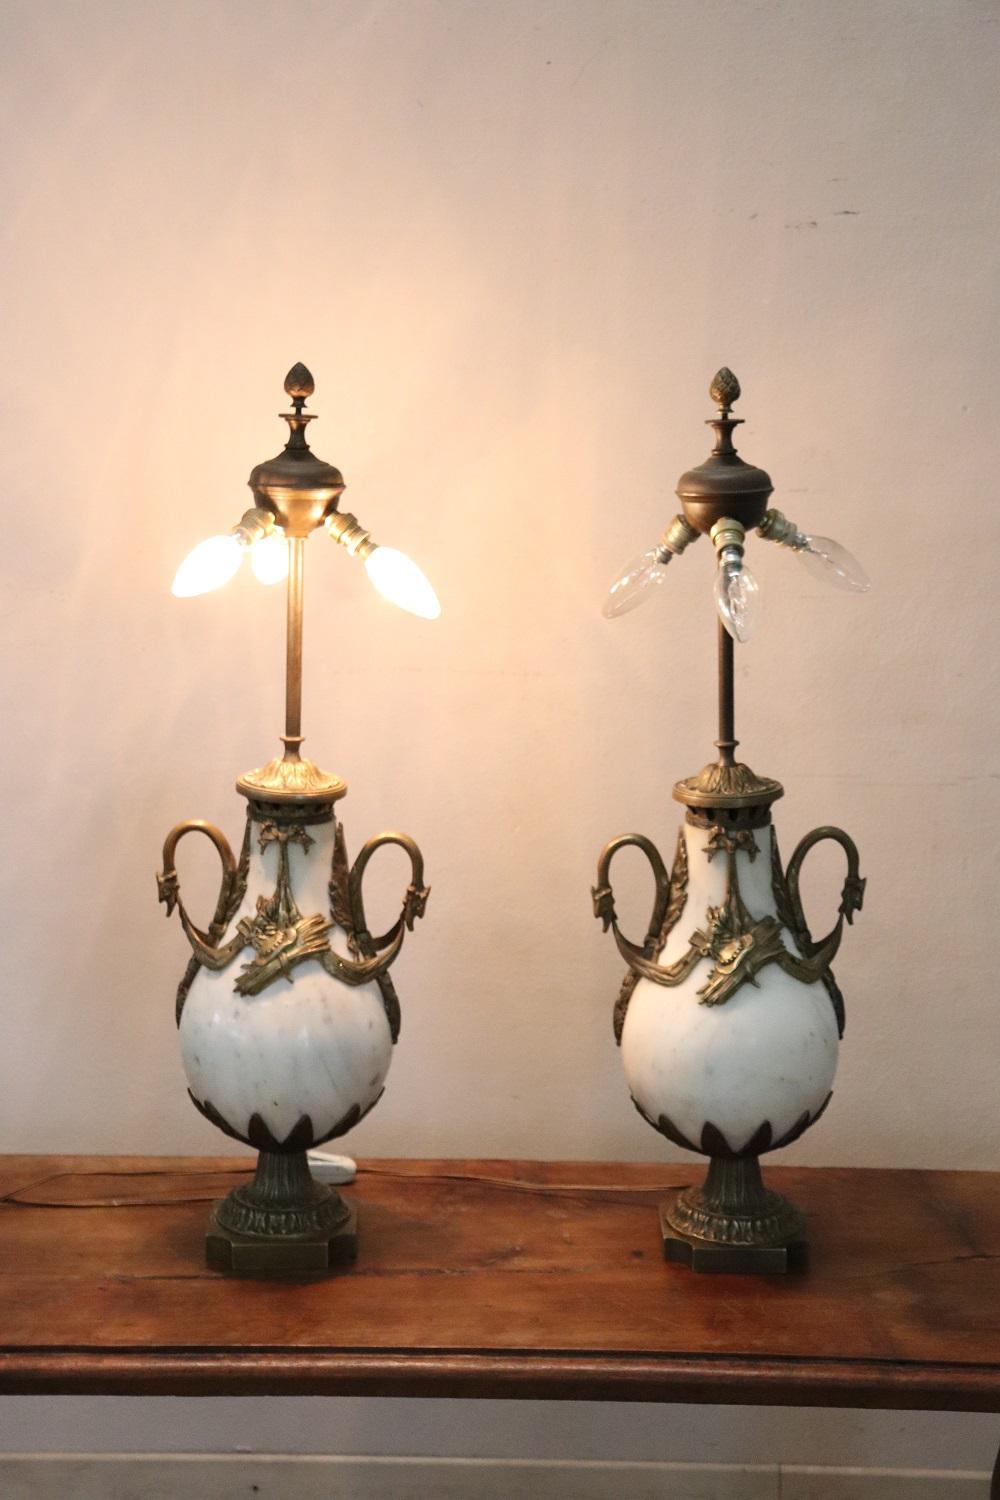 Beautiful and rare Italian pair of table lamps of the period art nouveau. The body of the lamps is in precious white Carrara marble in the shape of a drop. The marble is embellished with finely chiseled gilt bronze decorations. The gilded bronze has